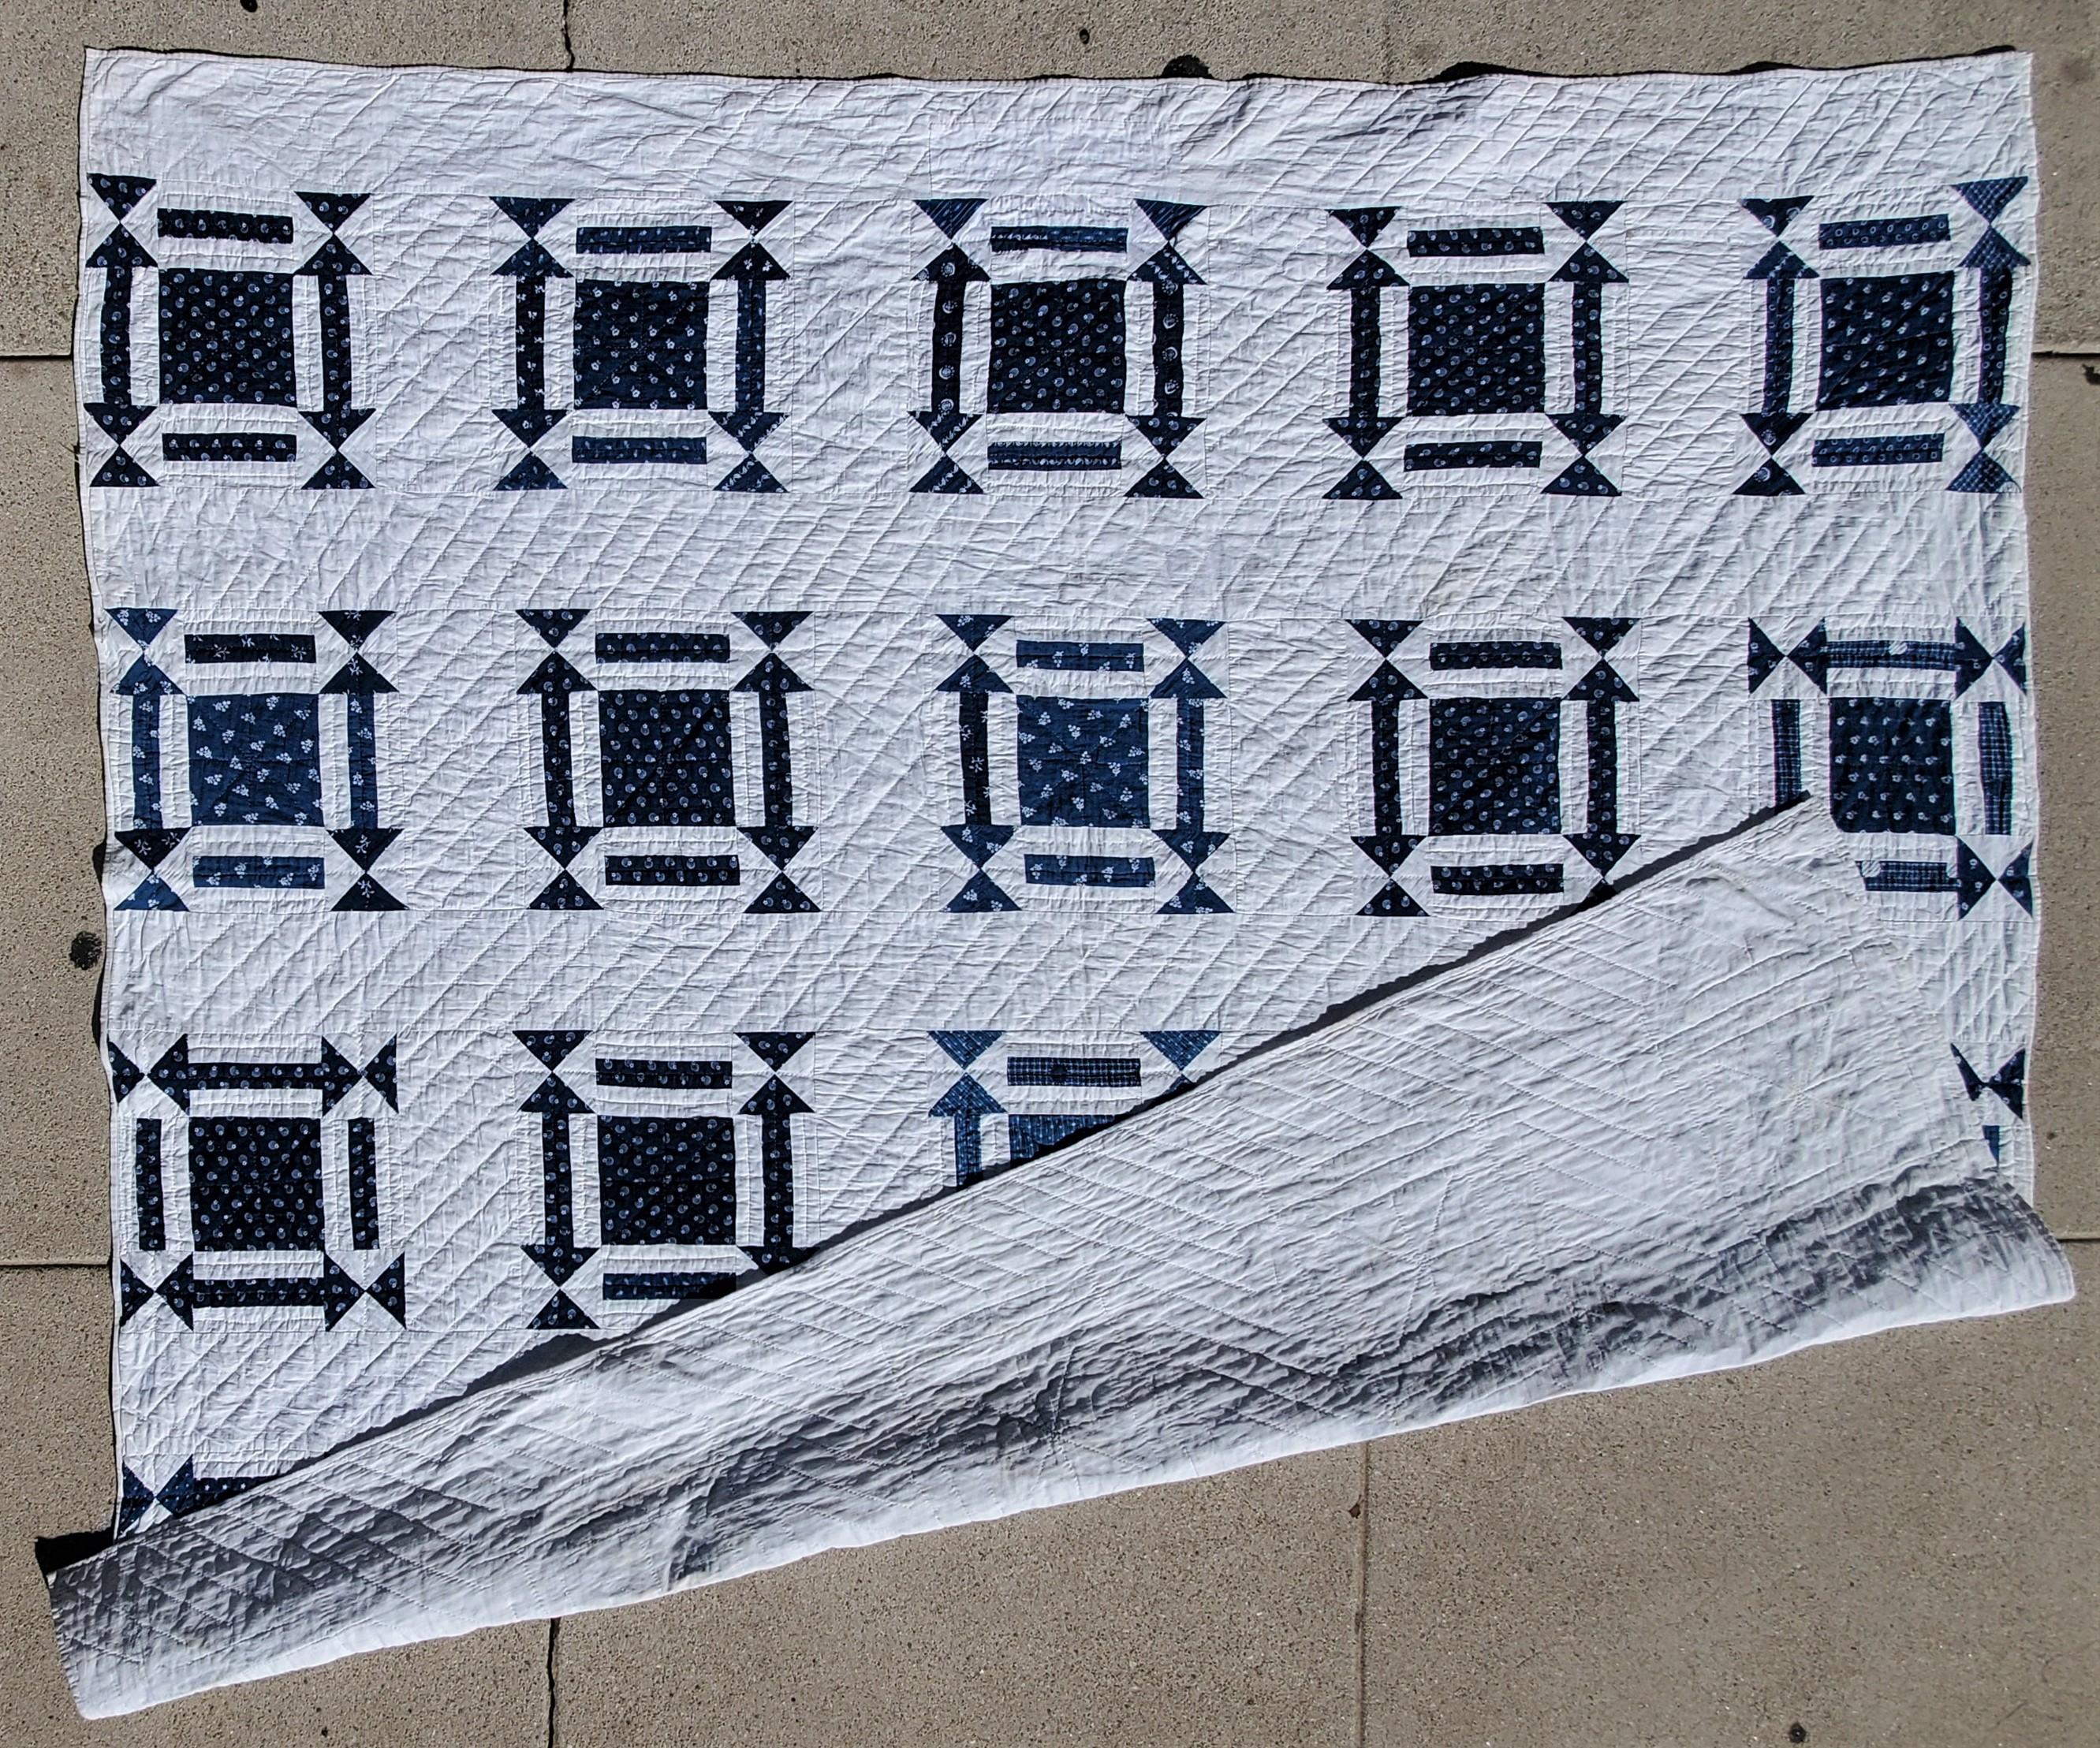 This is a fun geometric blue & white quilt with arrows and square surround. The condition is very good.